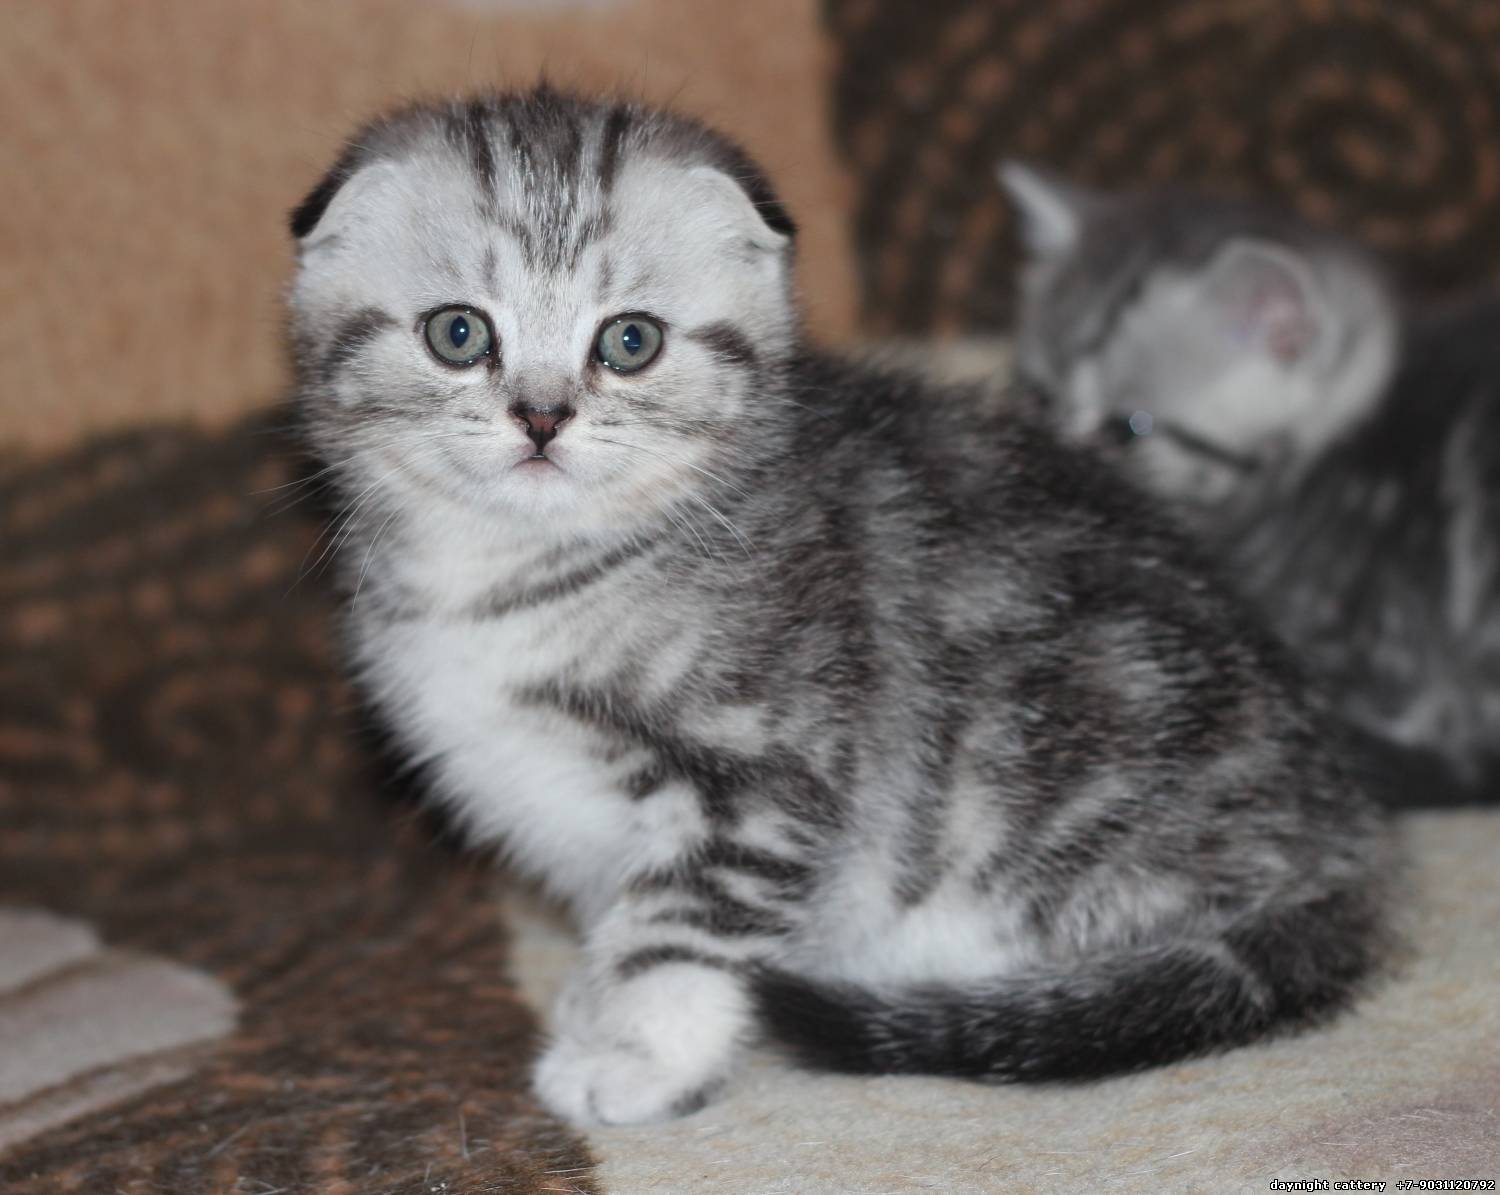 Where can you adopt a Scottish Fold cat?